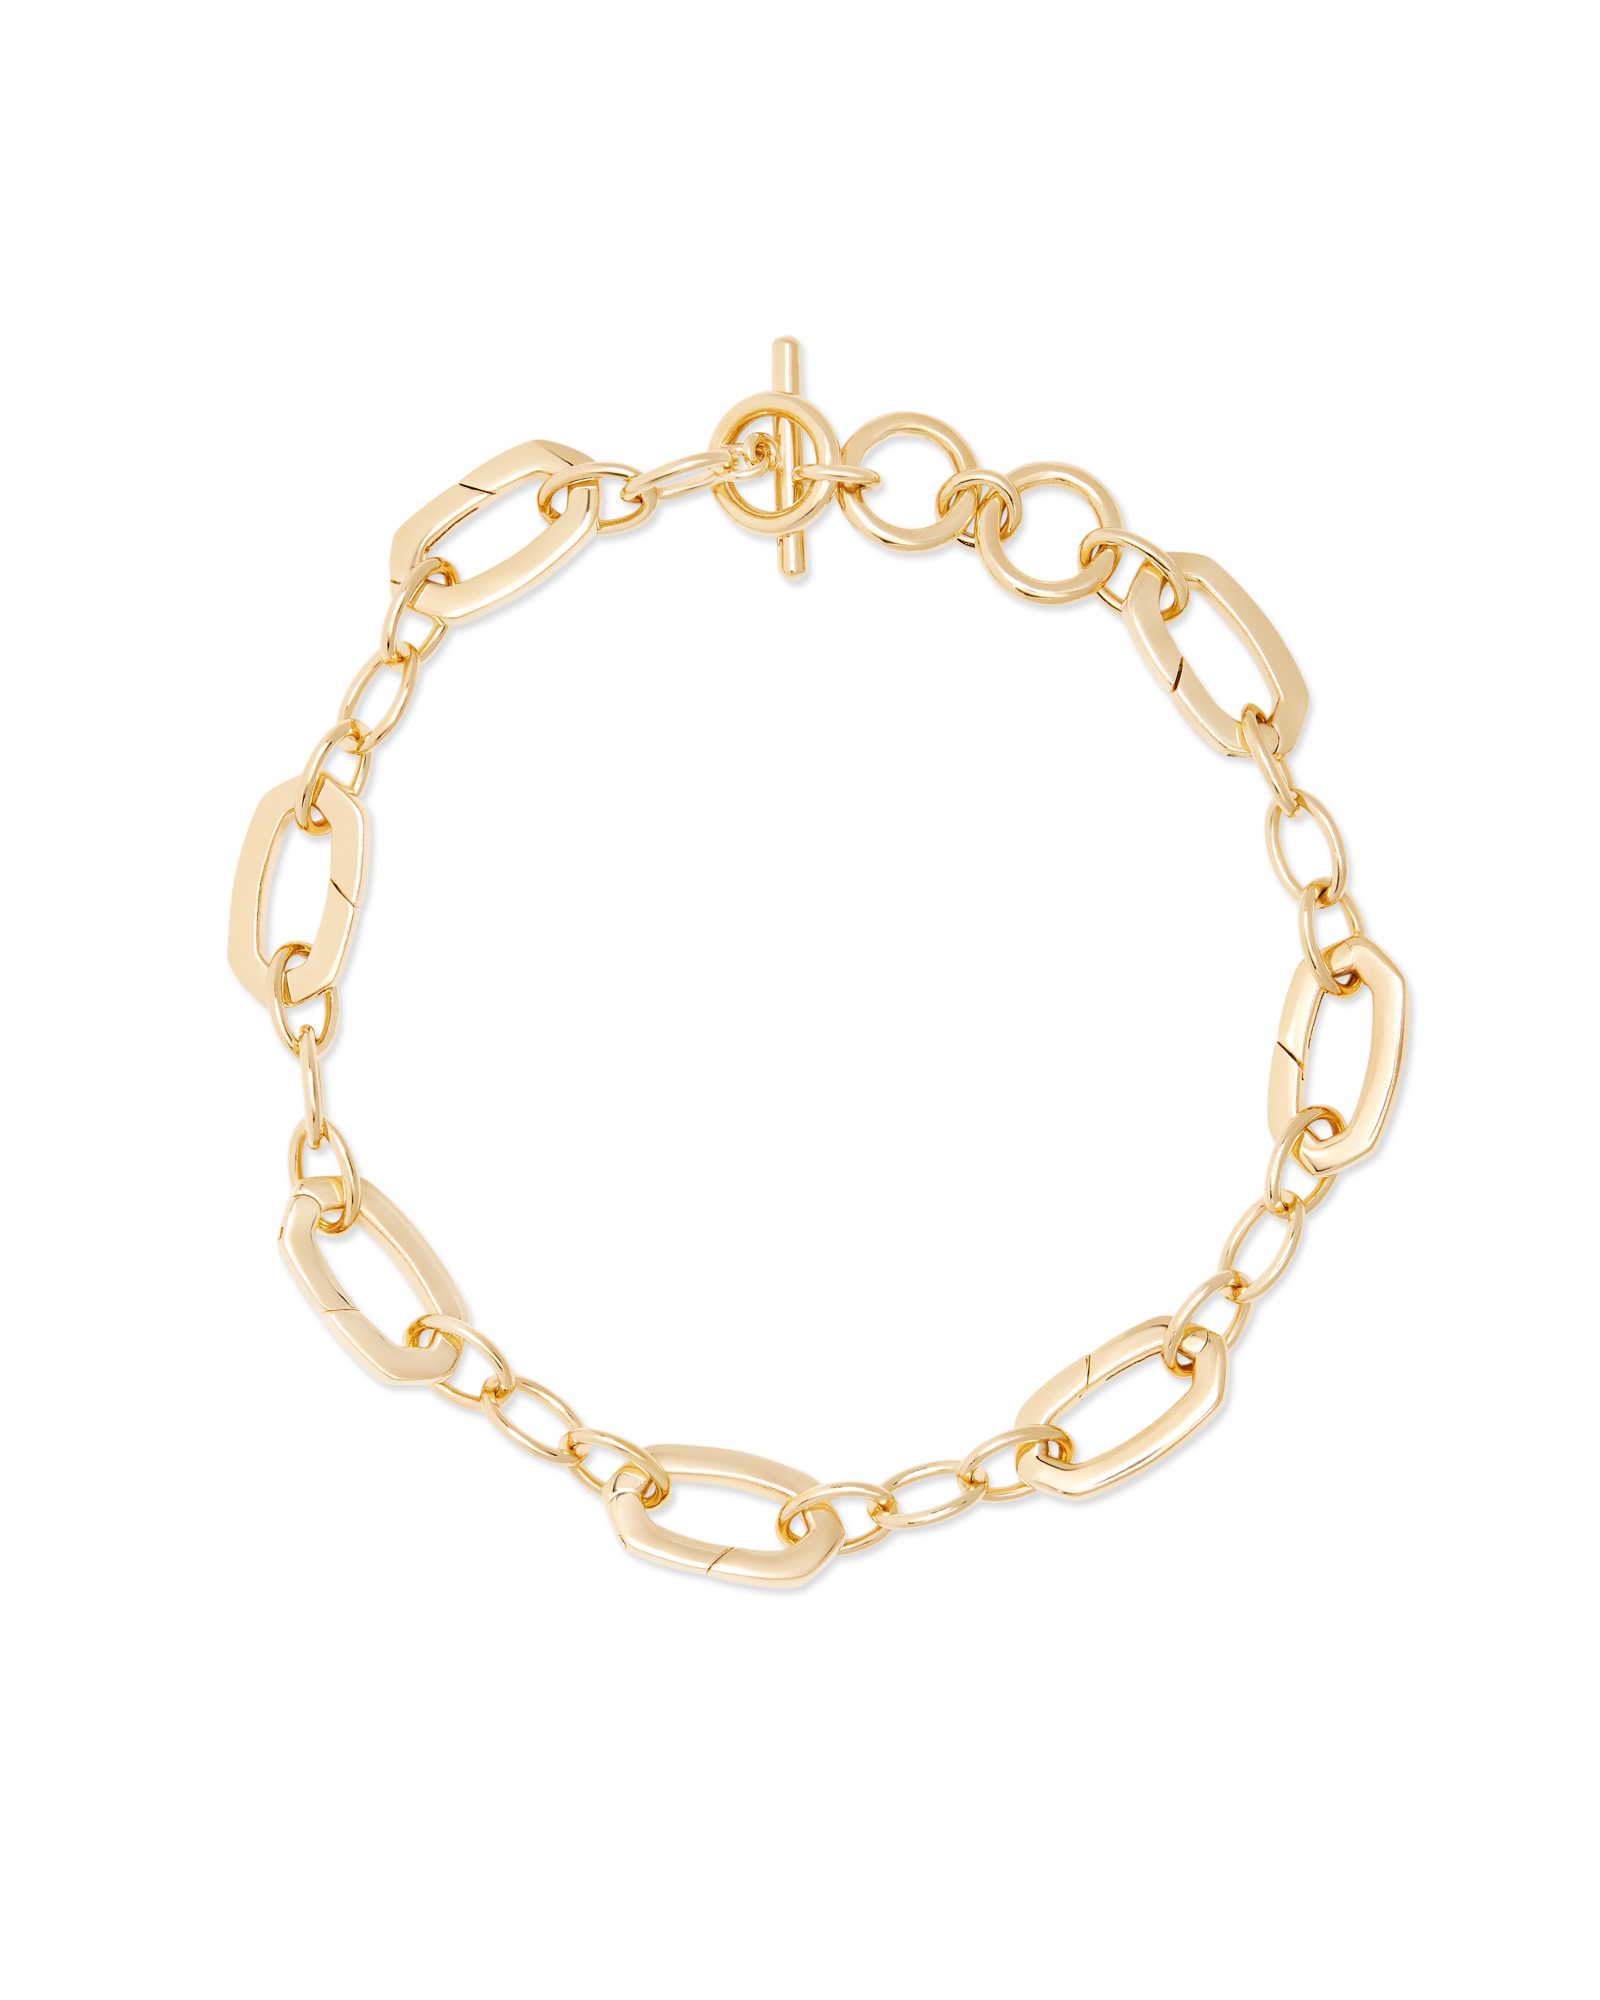 Twin Sprial Design Chain Type Gold Bracelet BRAC506 | Bracelet designs, Gold  bracelet, Bracelet shops